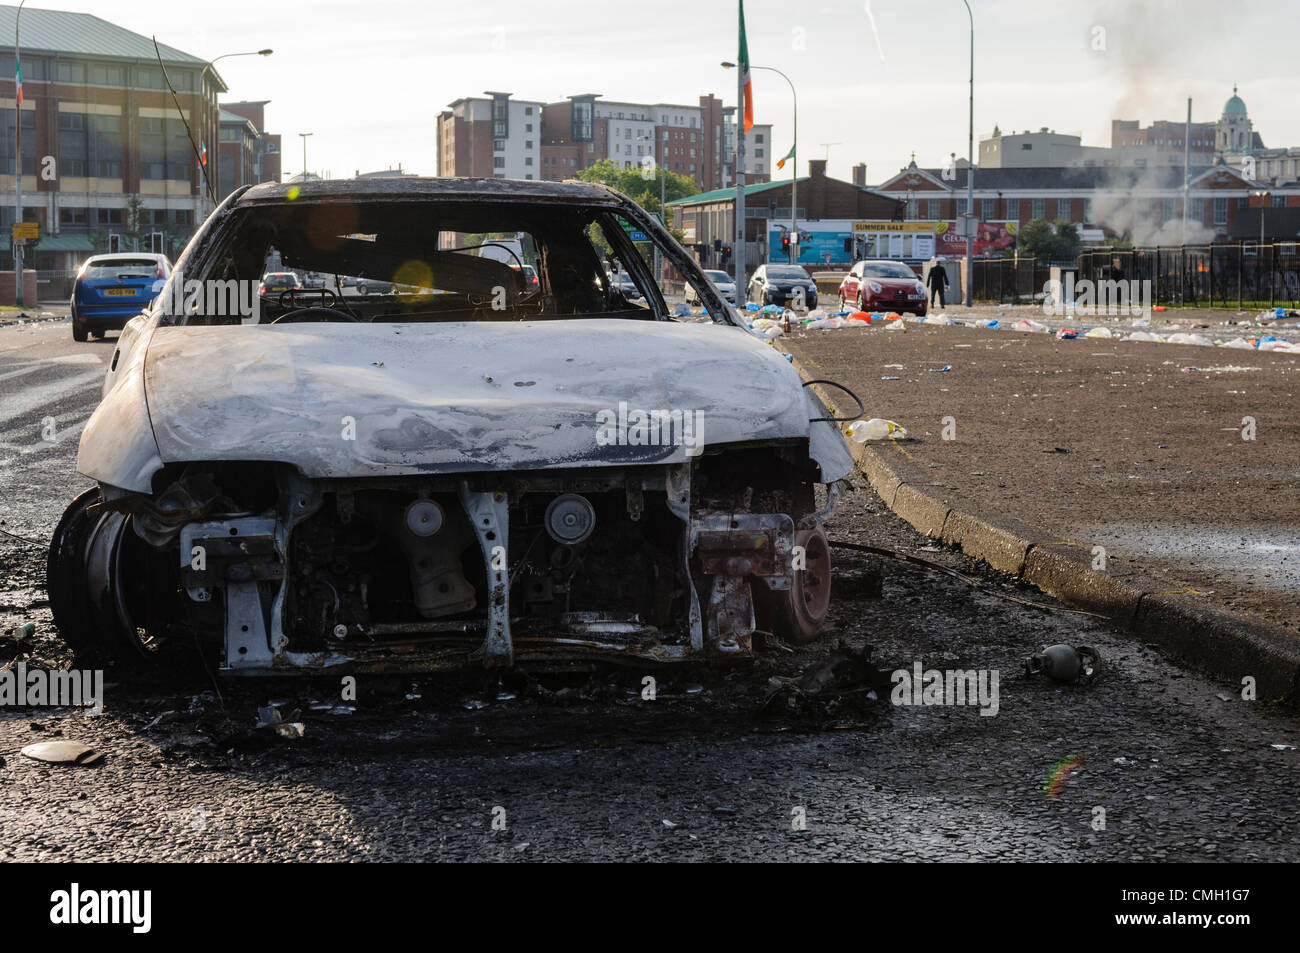 Belfast, Northern Ireland. 9th August, 2012. Burned out cars, stones and broken bottles litter Divis Street in West Belfast, after a night of disturbances at bonfires to commemorate the introduction of Internment in 1971. Stock Photo